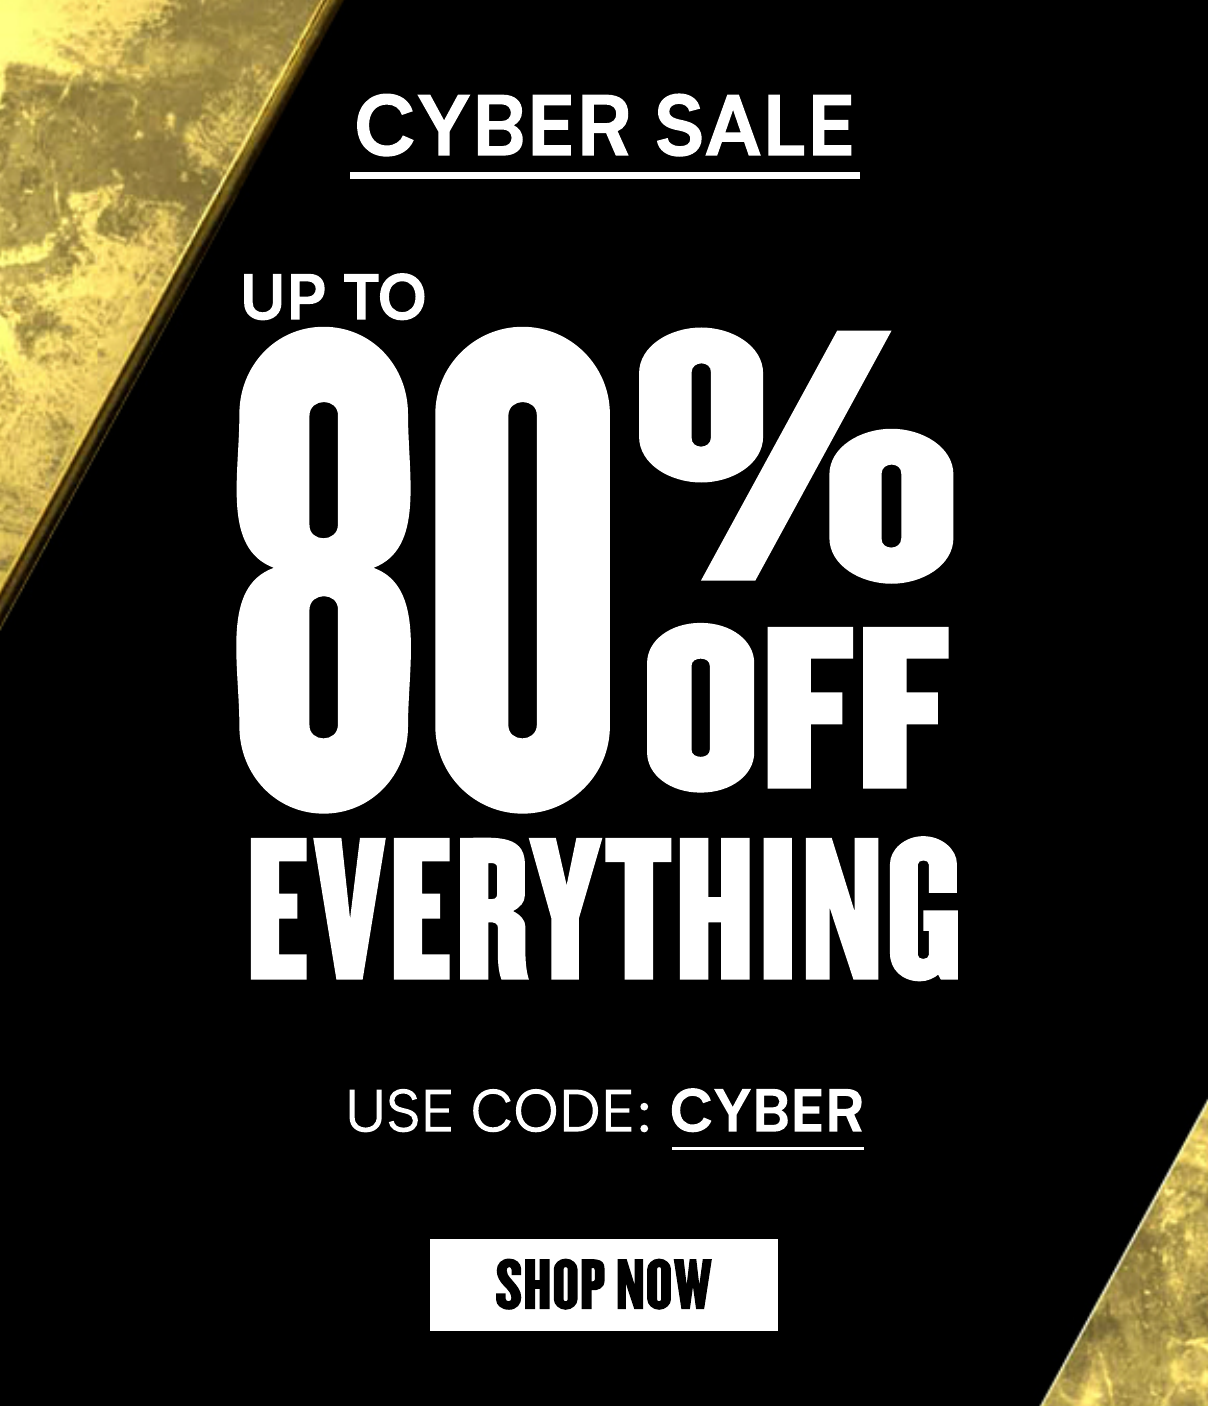 Up to 80% off EVERYTHING